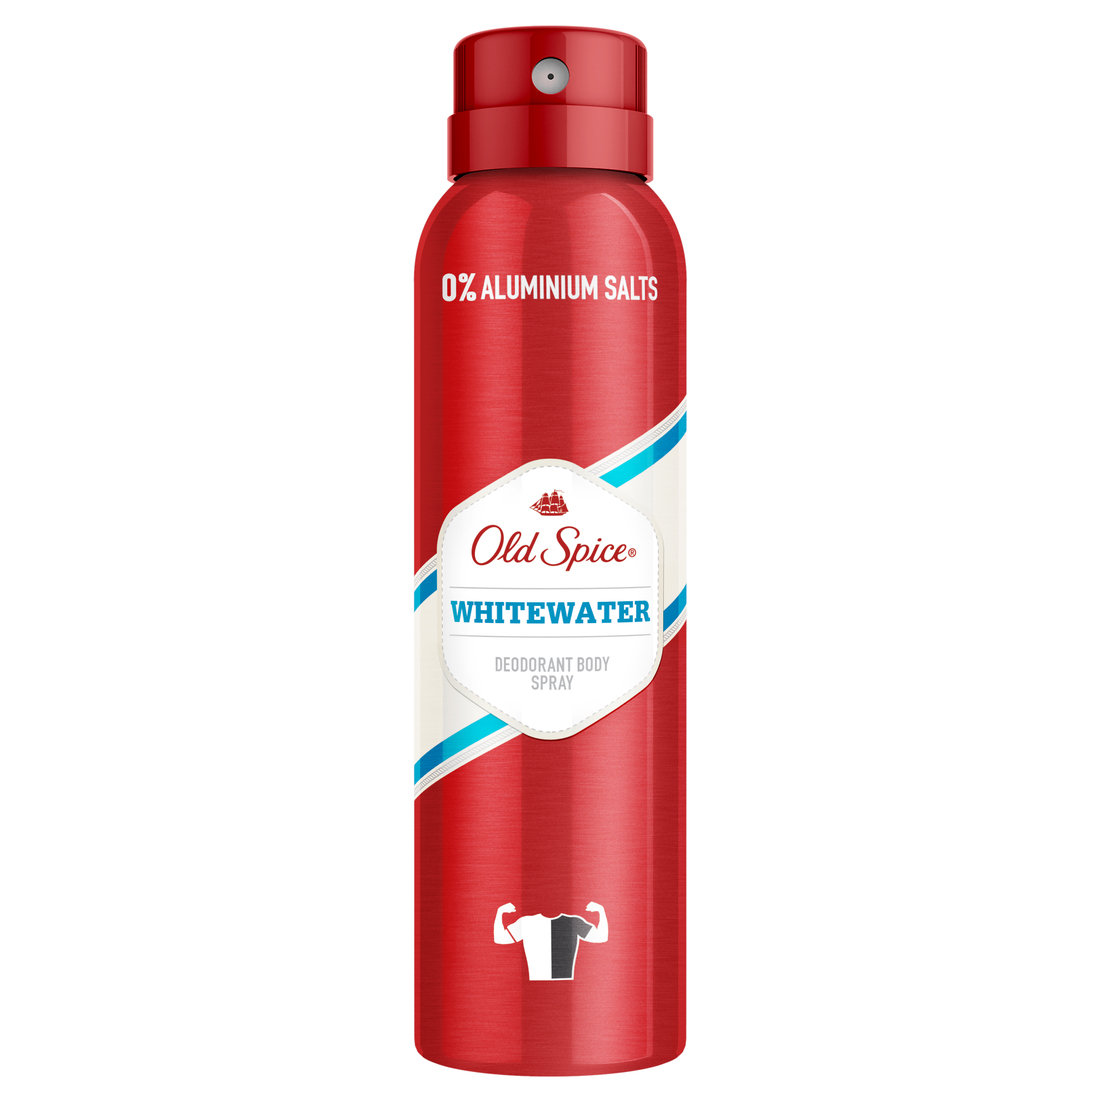 Old Spice Whitewater 125ml